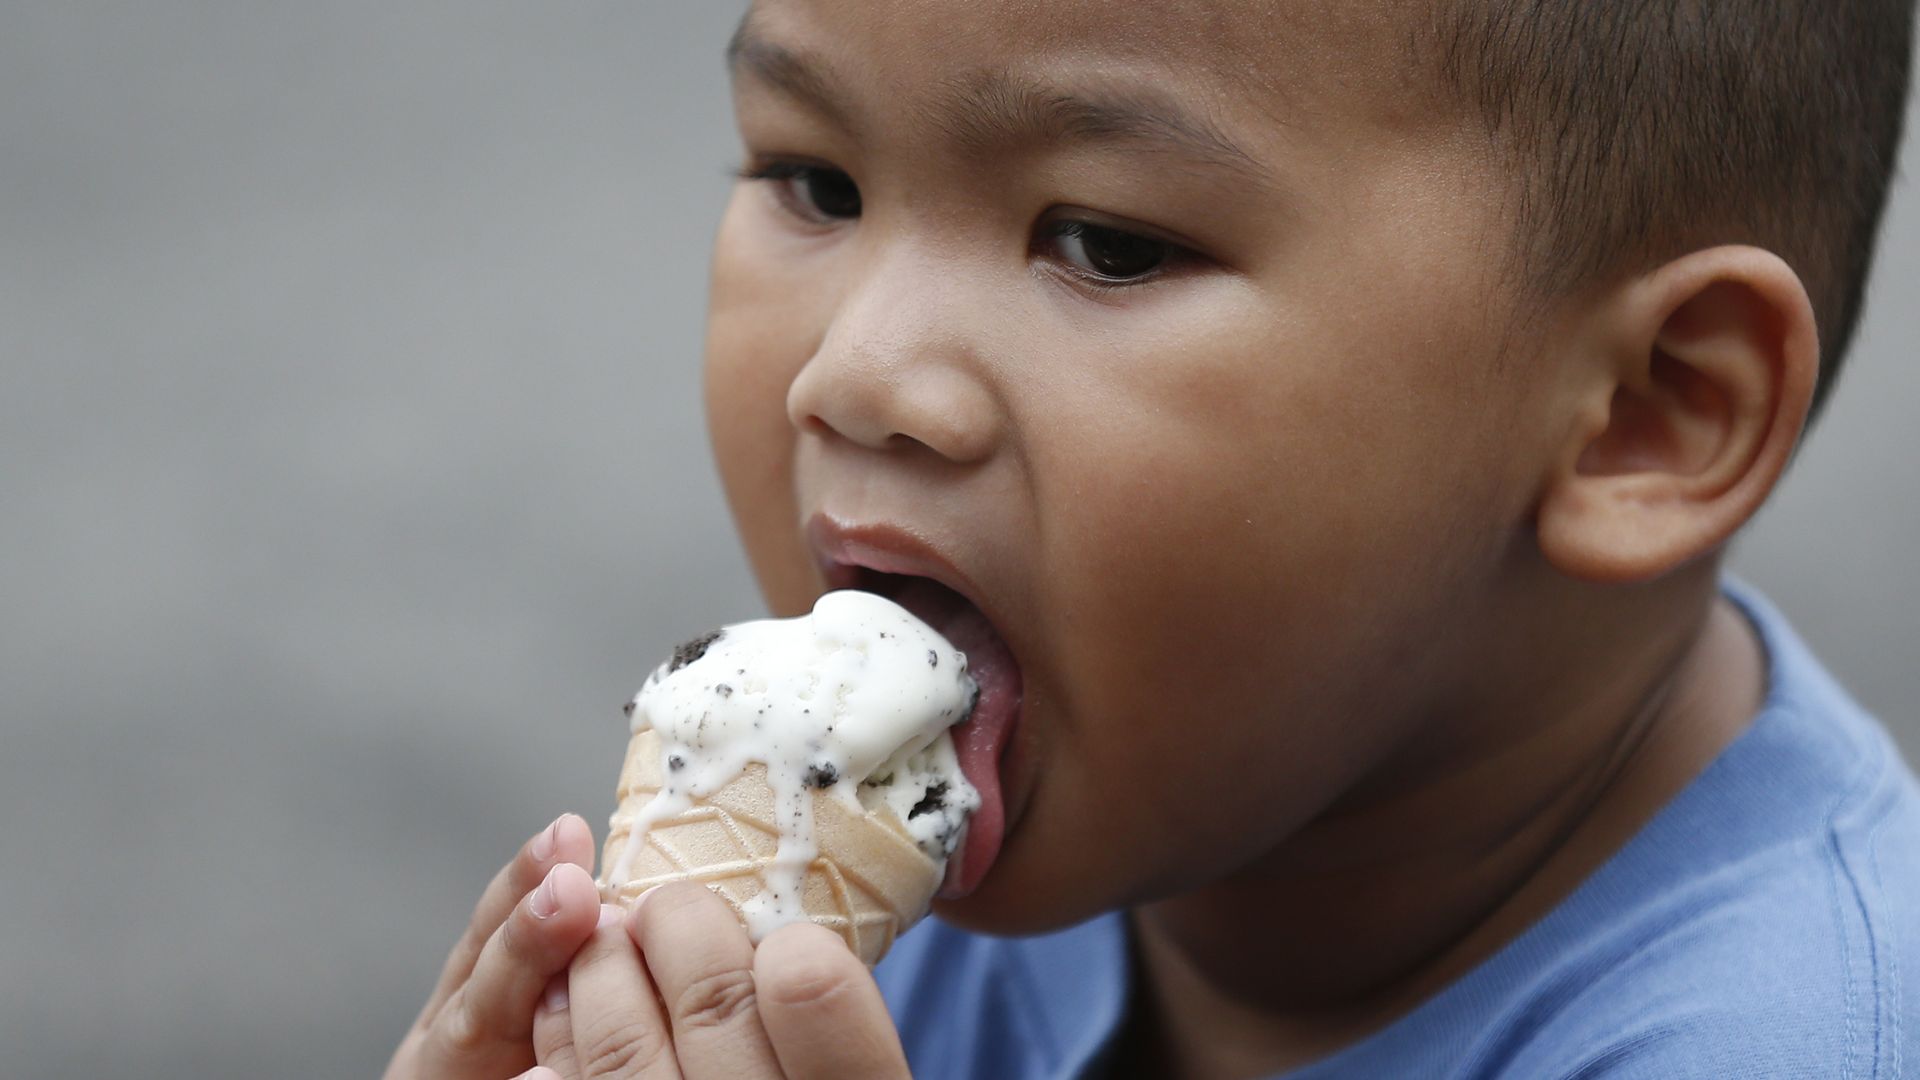 In this image, a toddler eats an ice cream cone